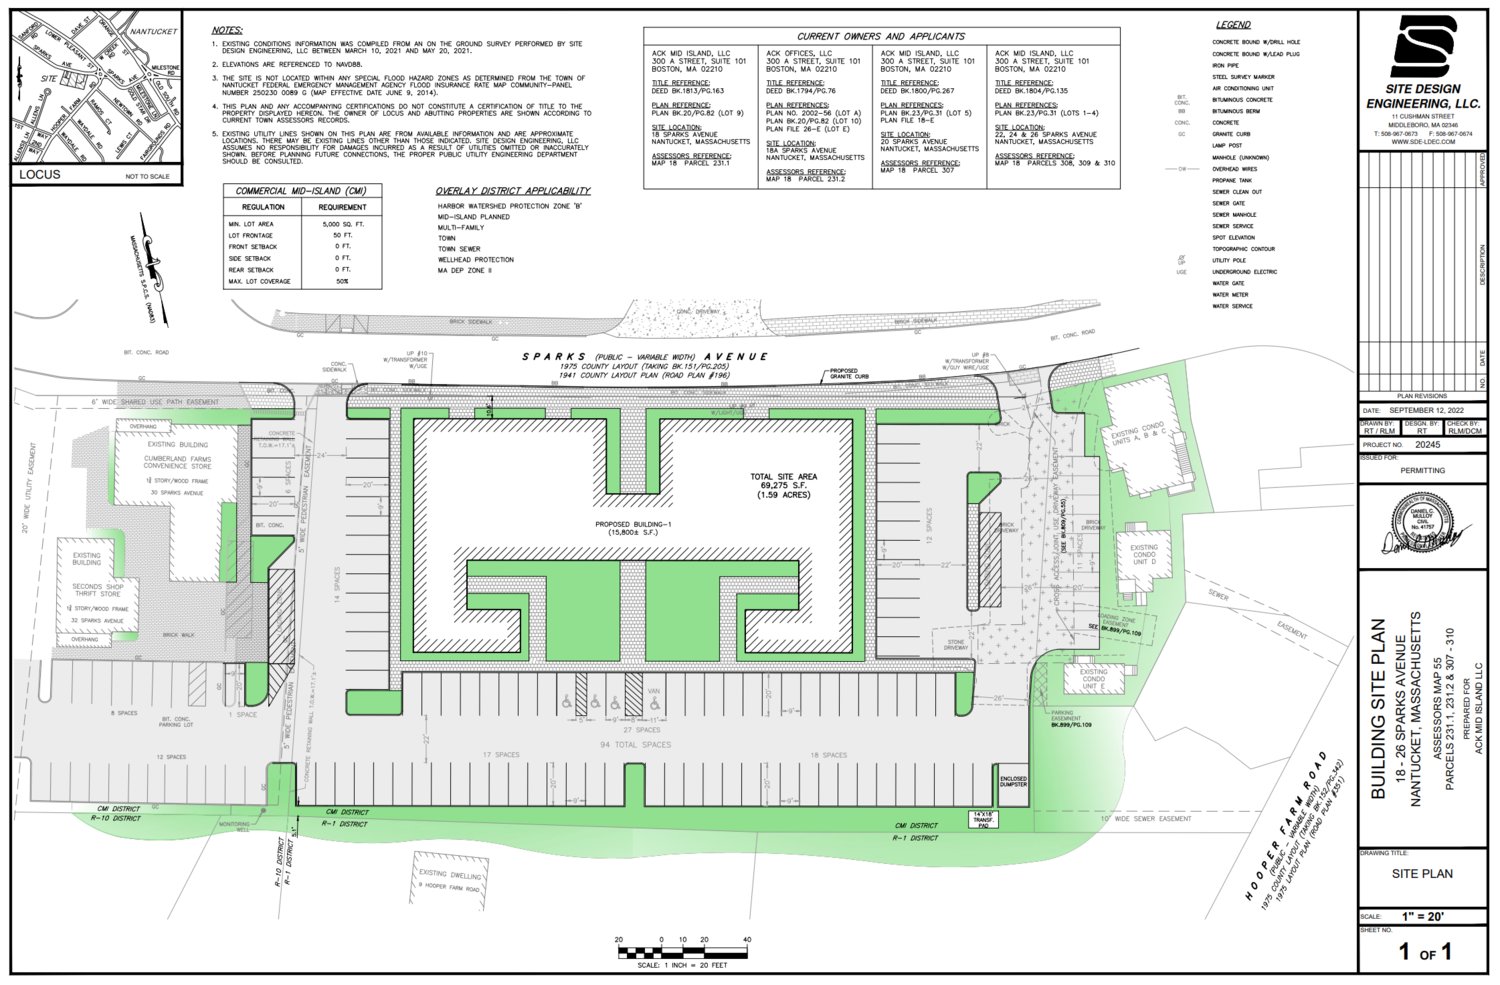 The layout of a proposed 63,000 square-foot mixed-use building on Sparks Avenue across from the Stop & Shop.